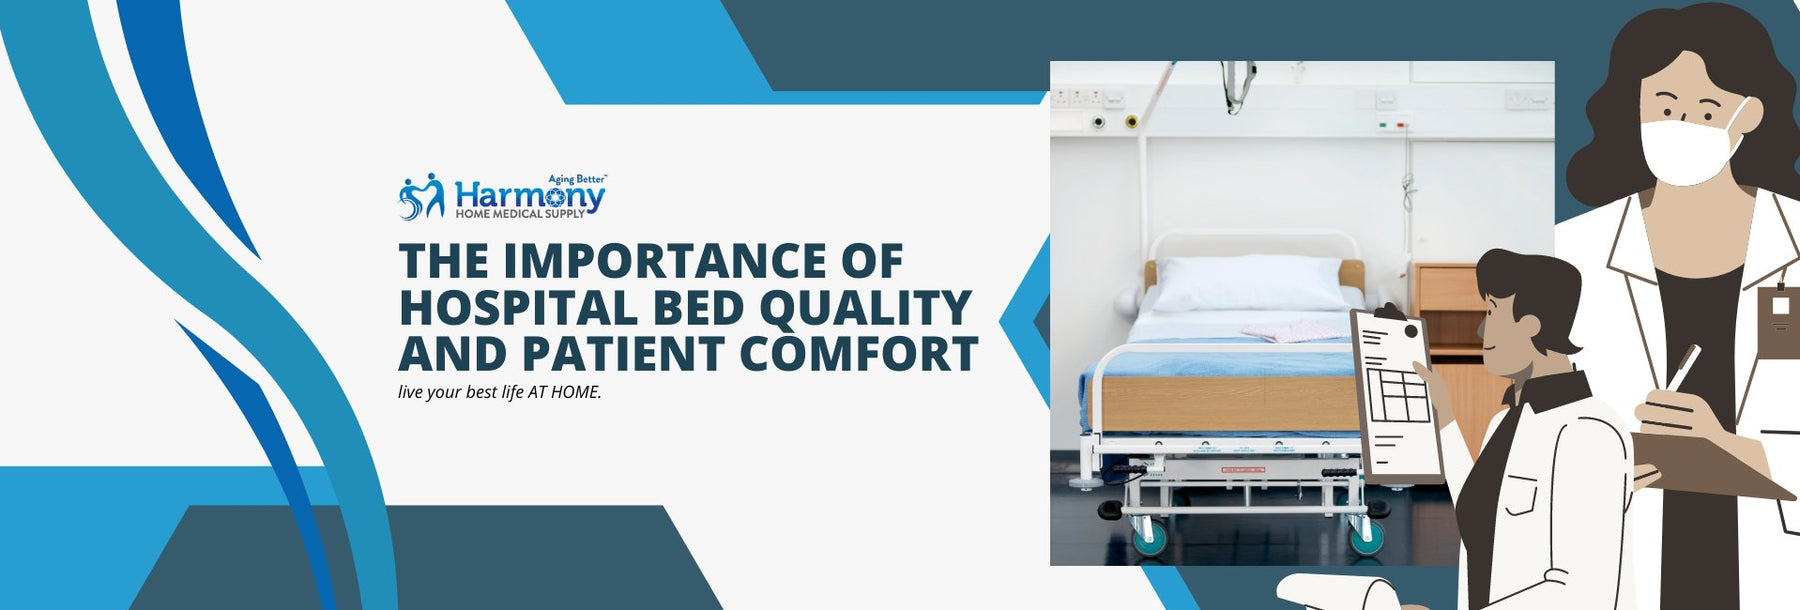 The Importance of Hospital Bed Quality and Patient Comfort - Harmony Home Medical Supply